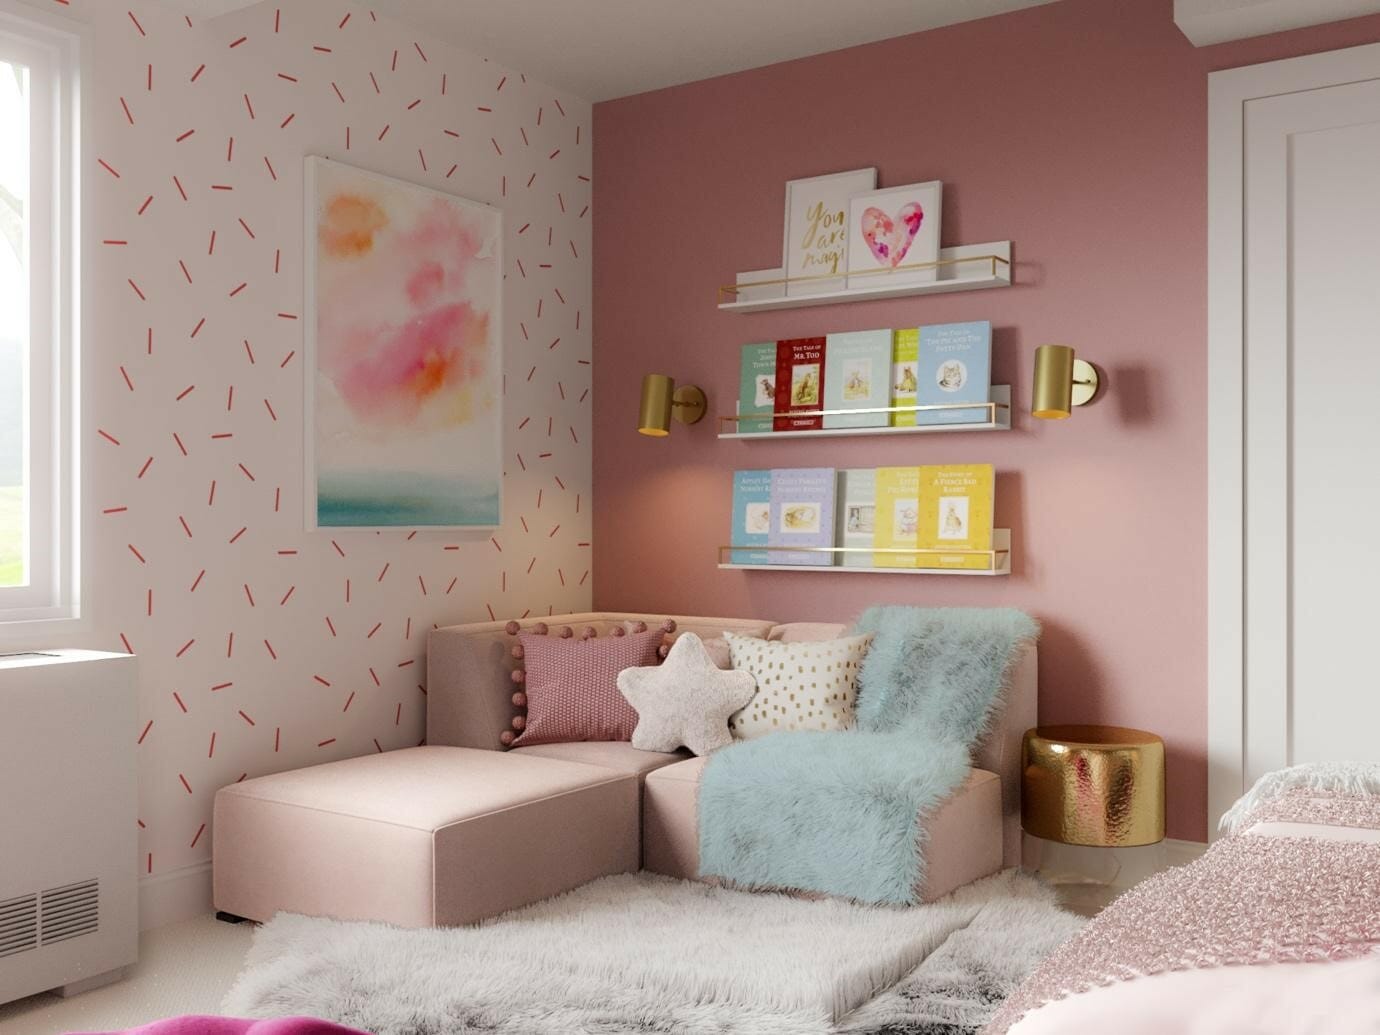 Small library ideas for a kids bedroom